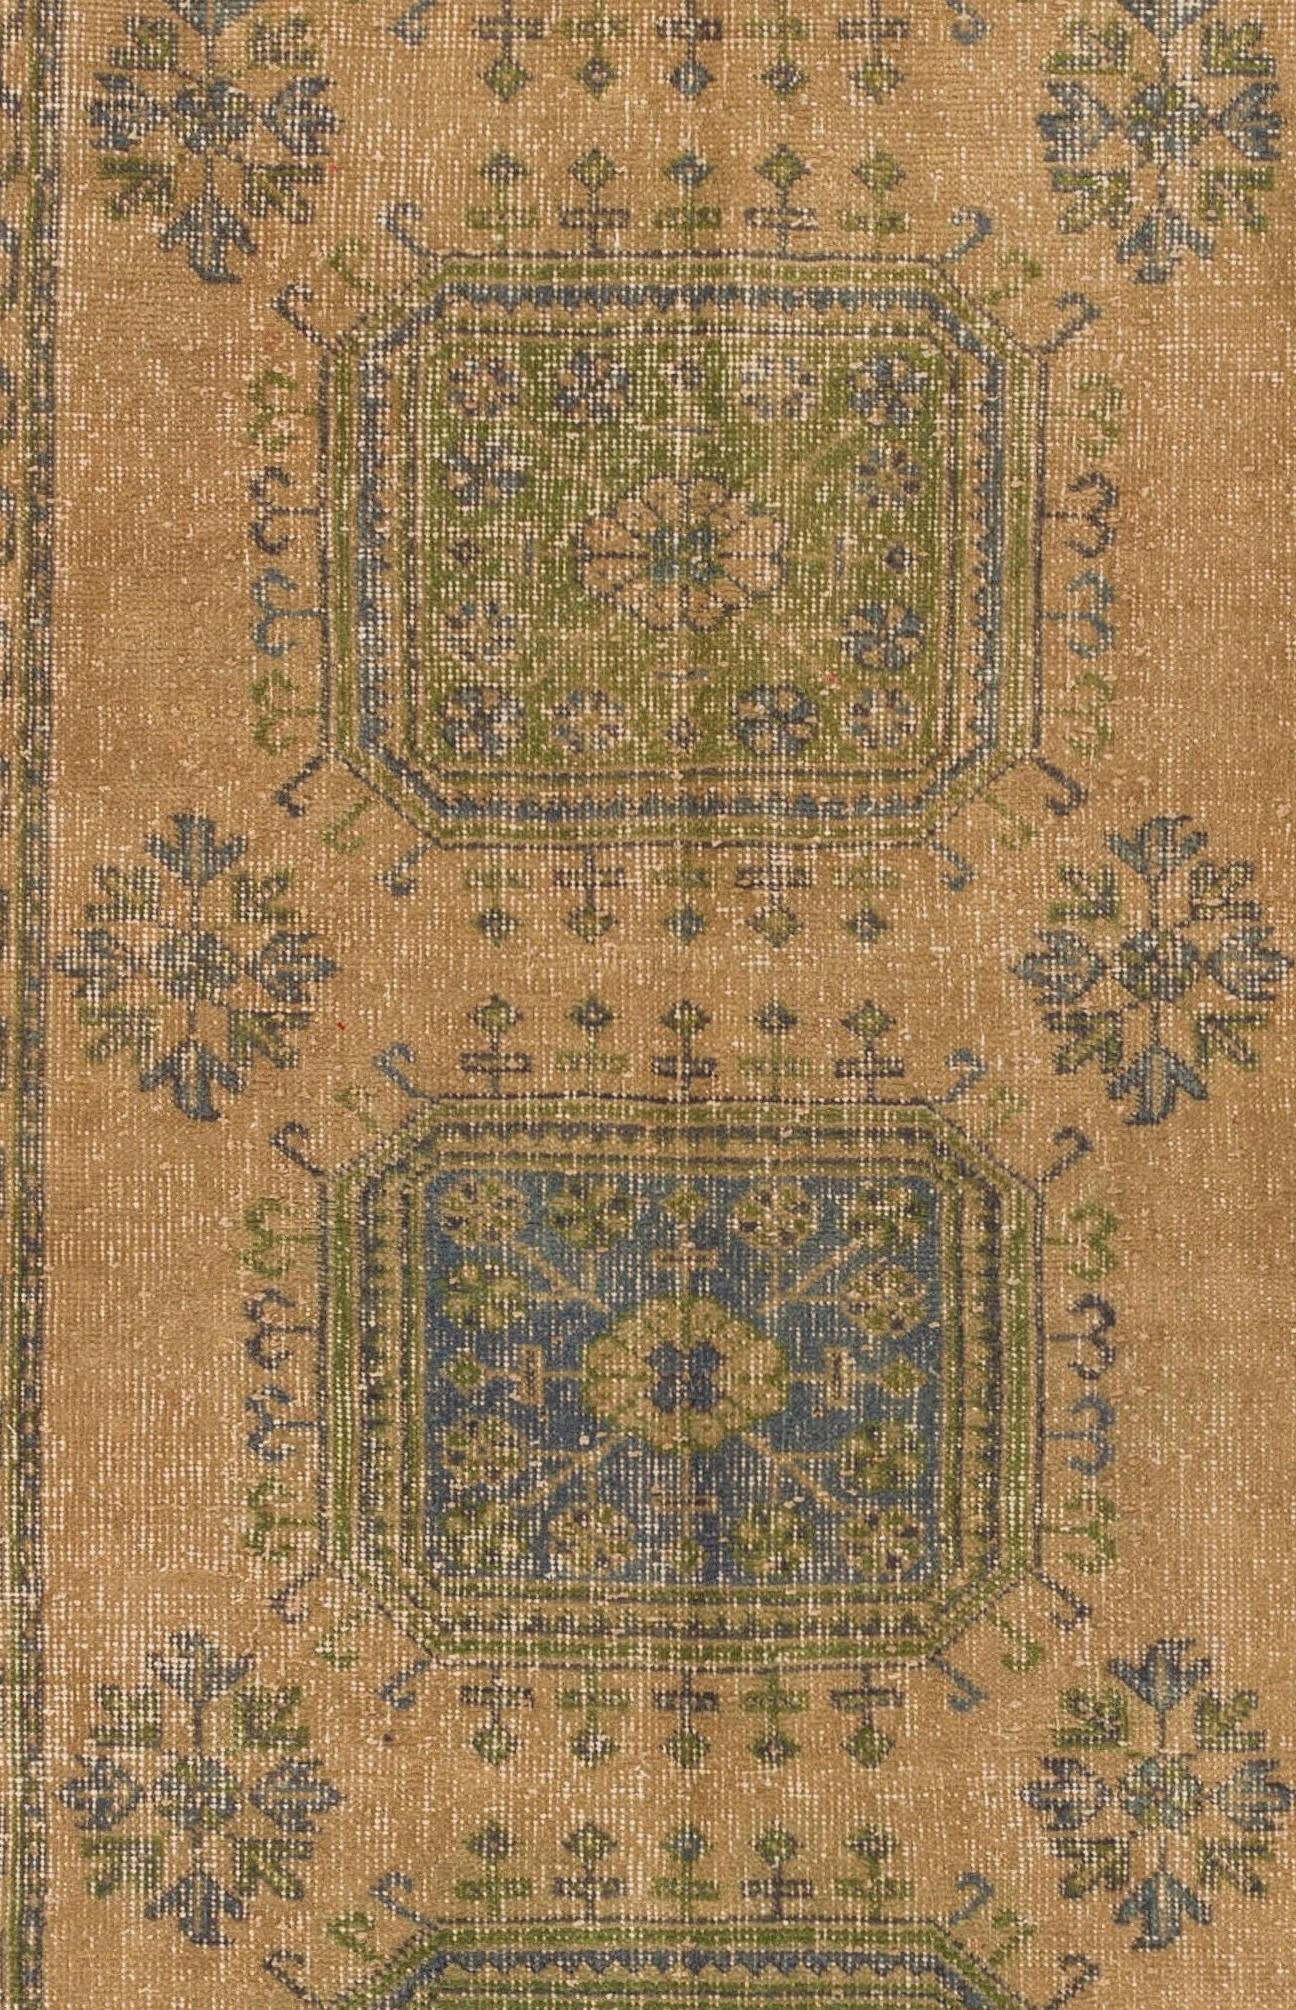 Cotton 3.3x11.5 Ft Authentic Vintage Oushak Runner Rug. Hand-Knotted Carpet for Hallway For Sale